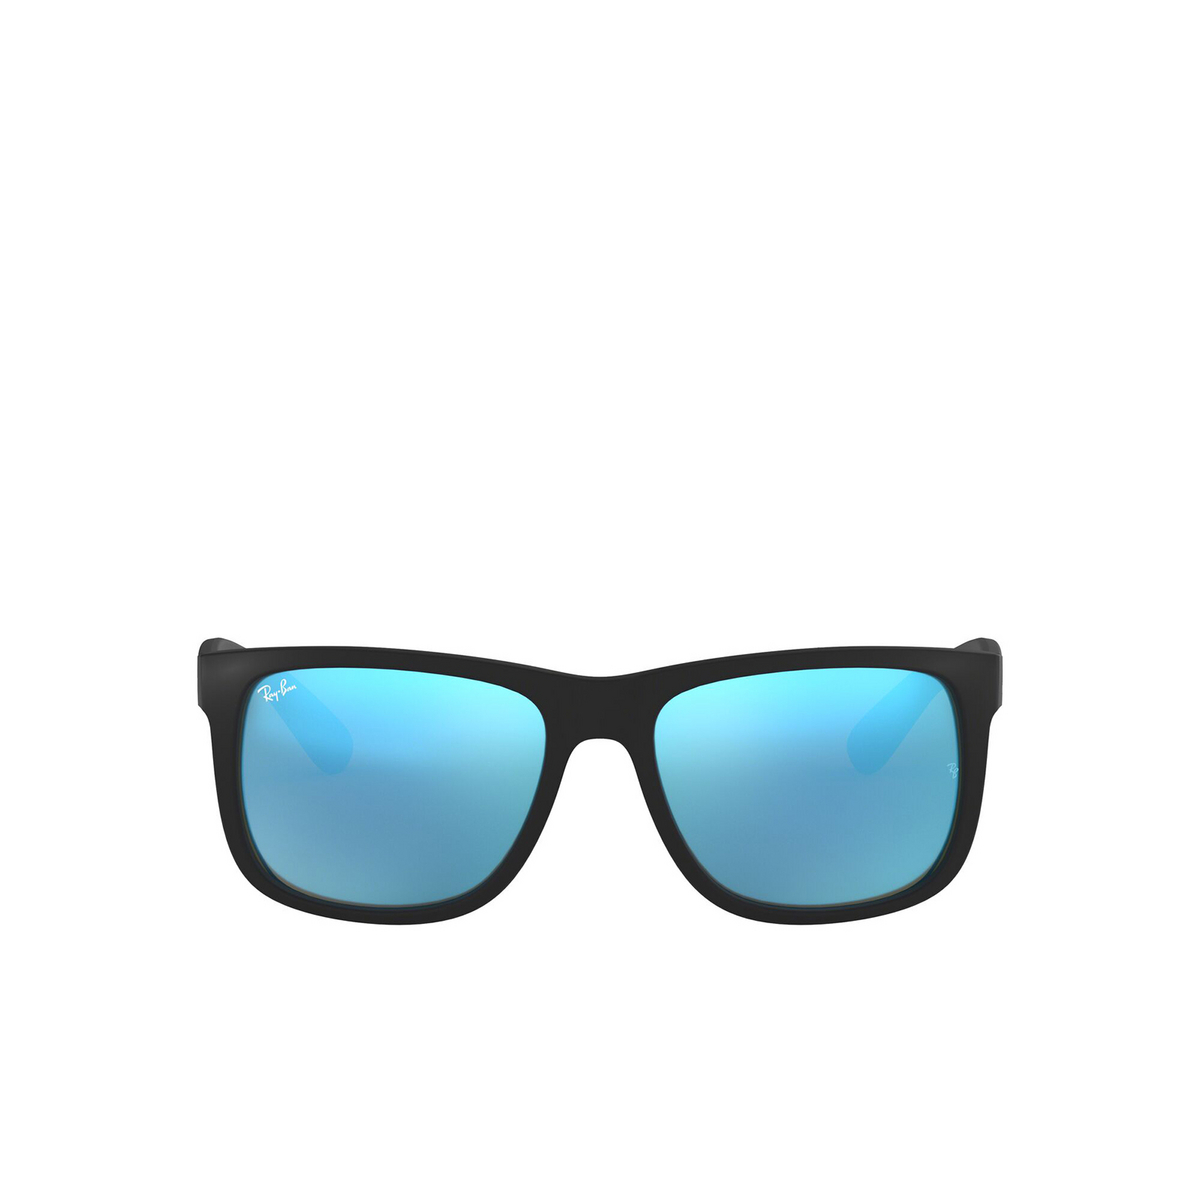 Ray-Ban® Square Sunglasses: Justin RB4165 color Rubber Black 622/55 - front view.